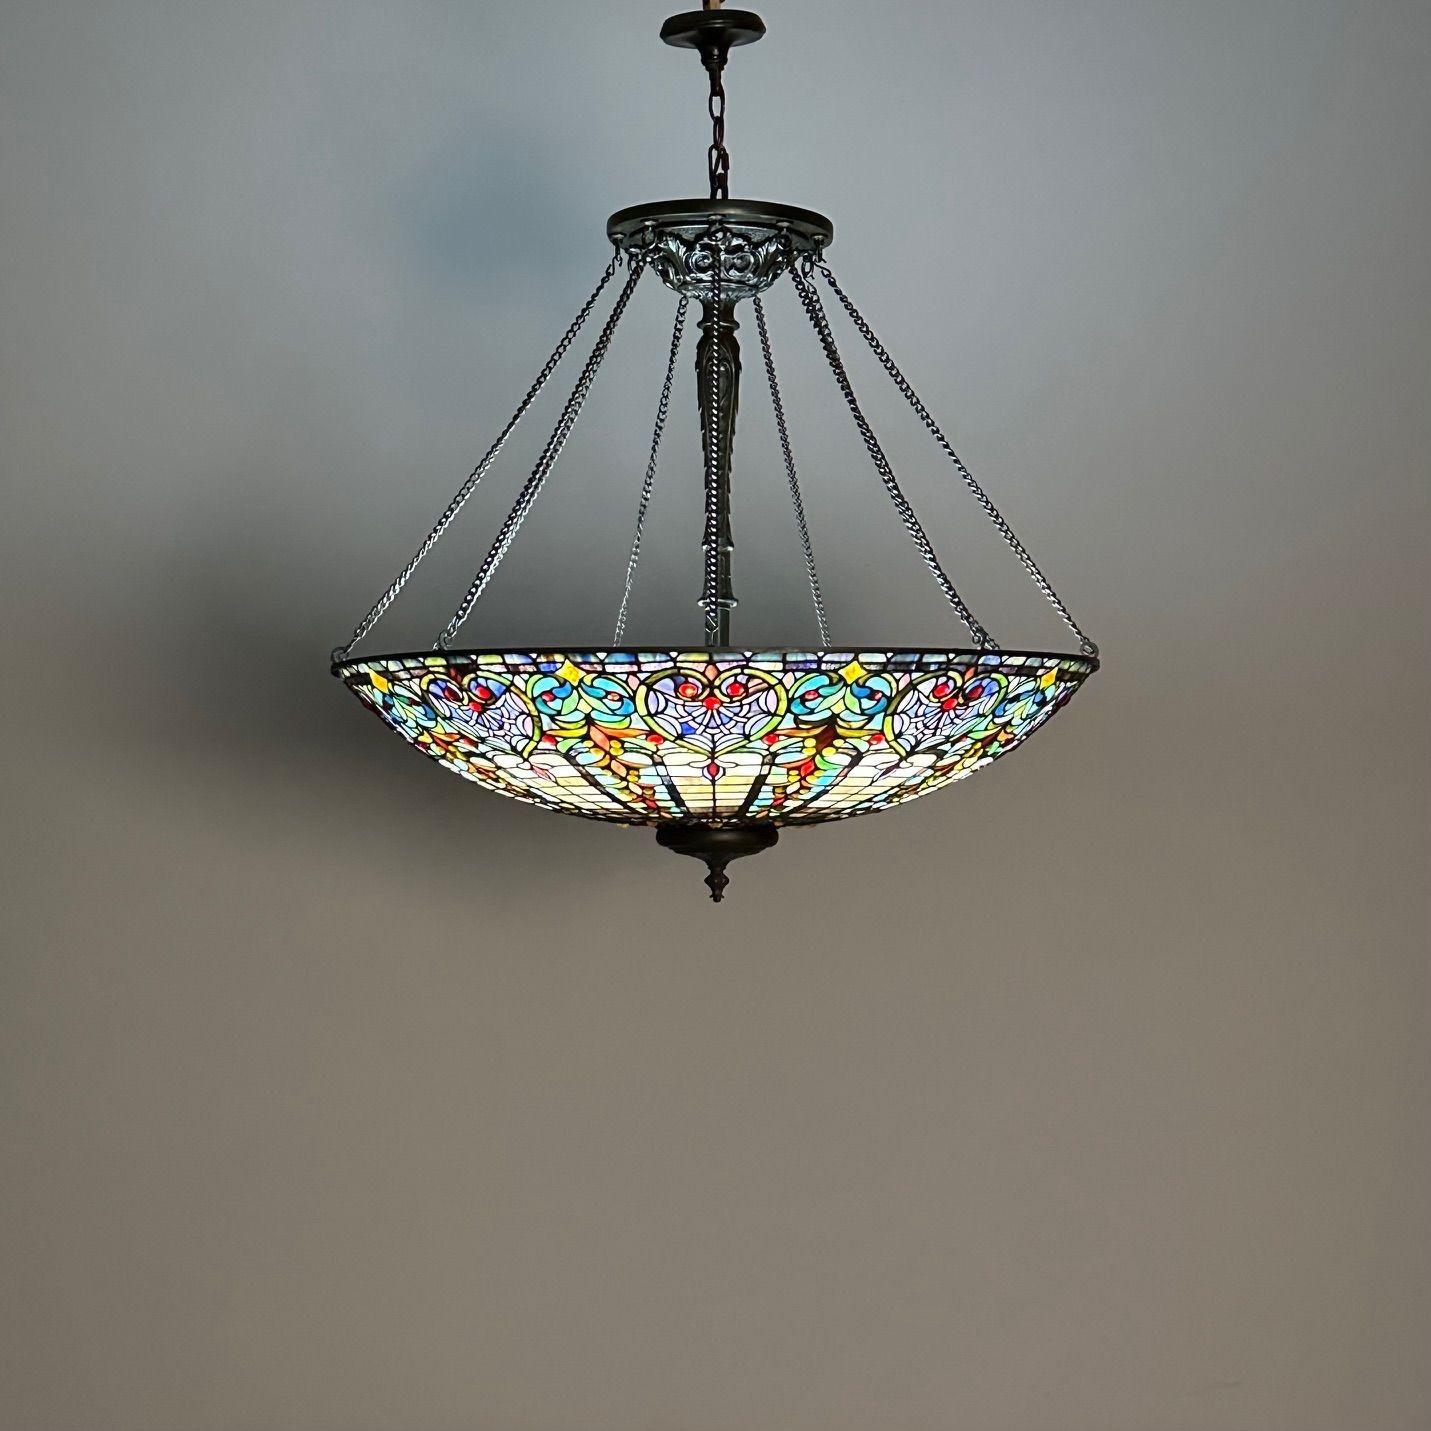 Contemporary Quoizel, Tiffany Style, Bowl Chandelier, Resin, Art Glass, Bronze, 2010s For Sale